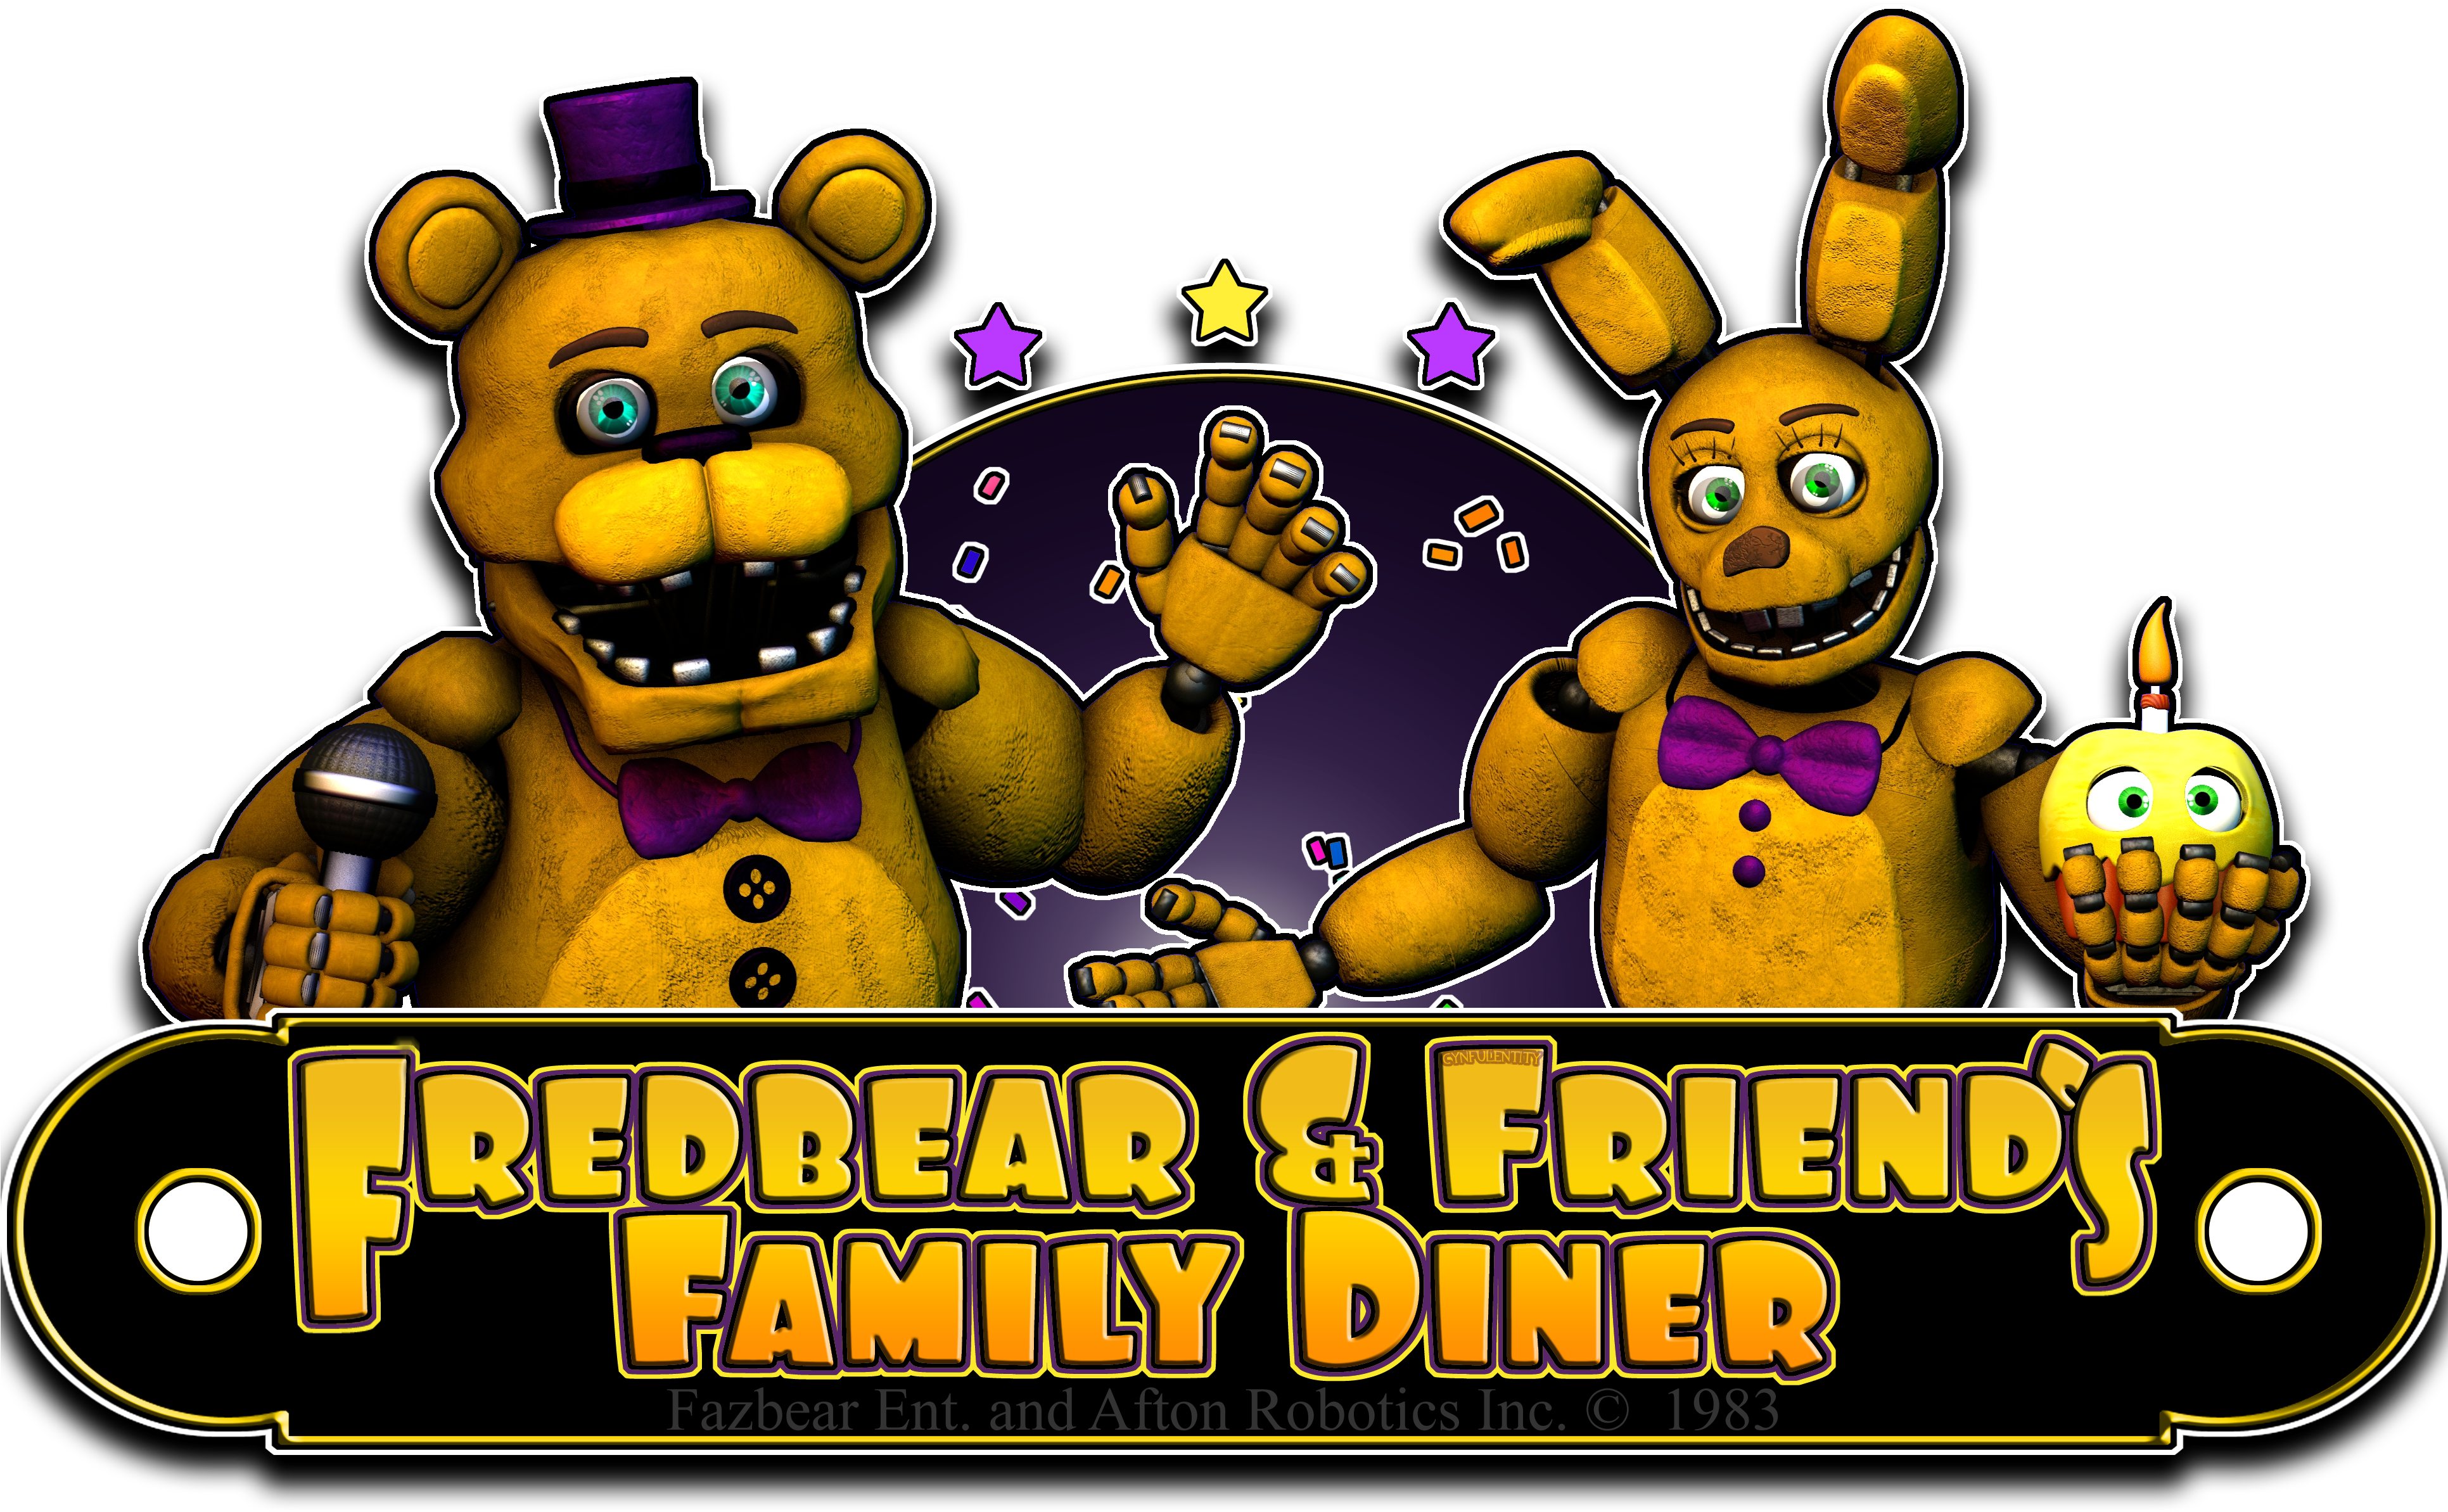 Convex In The Time That We Are To Them - Fredbear And Friends Family Diner (3863x2724)